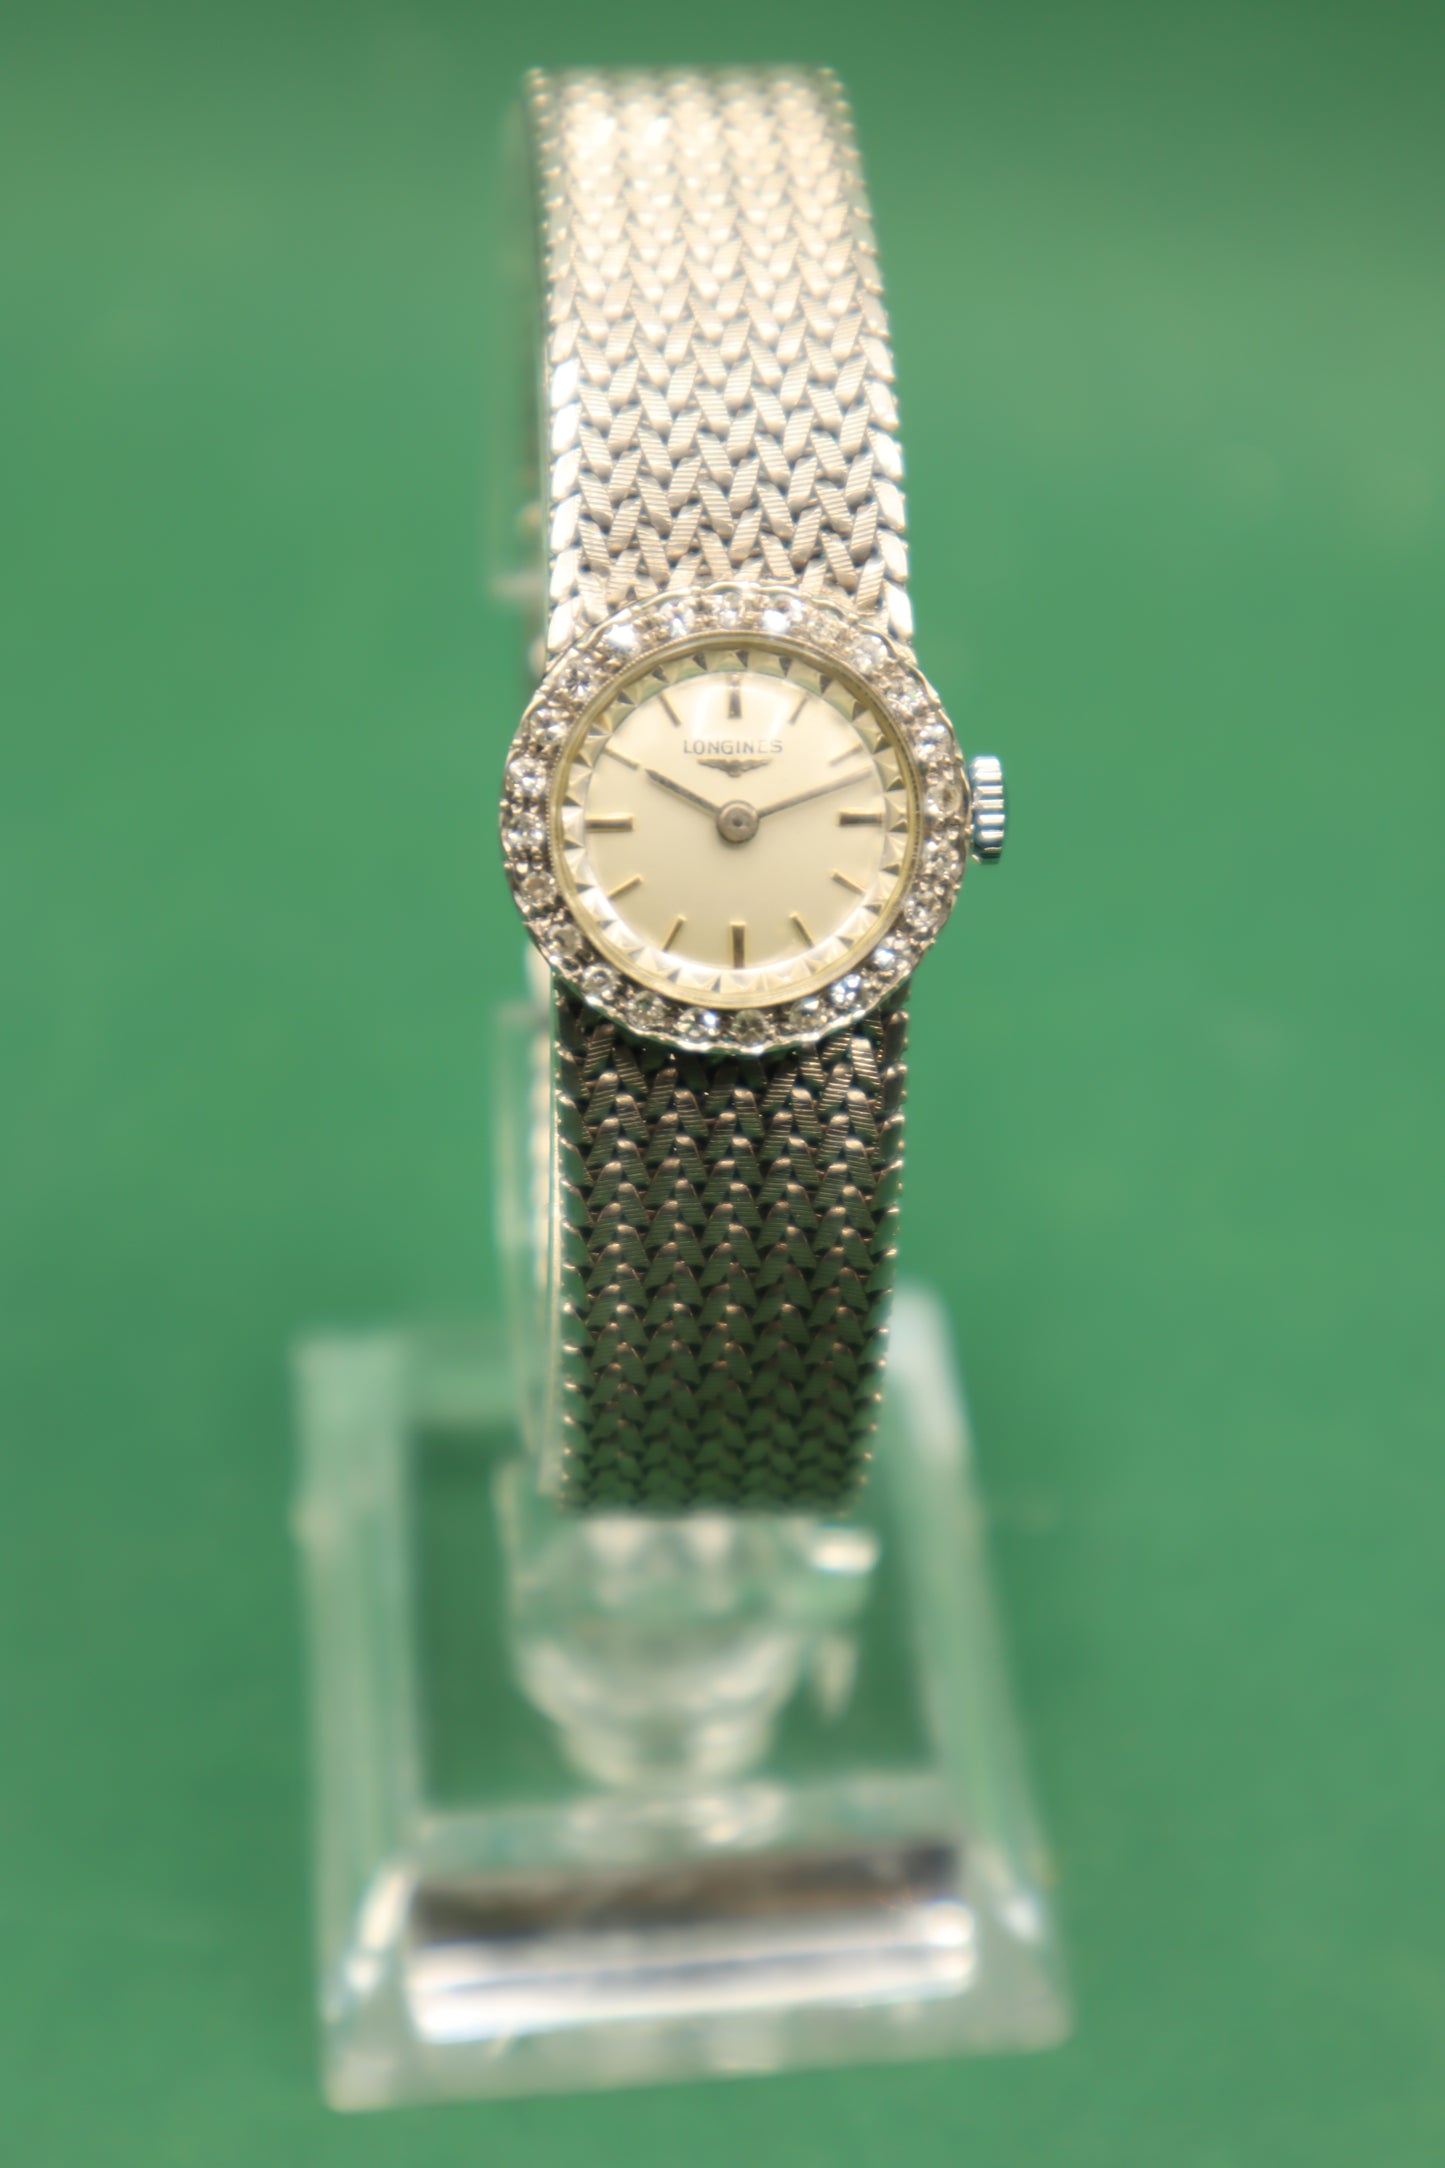 Longines Lady jewel watch white gold 18KT with real diamond's